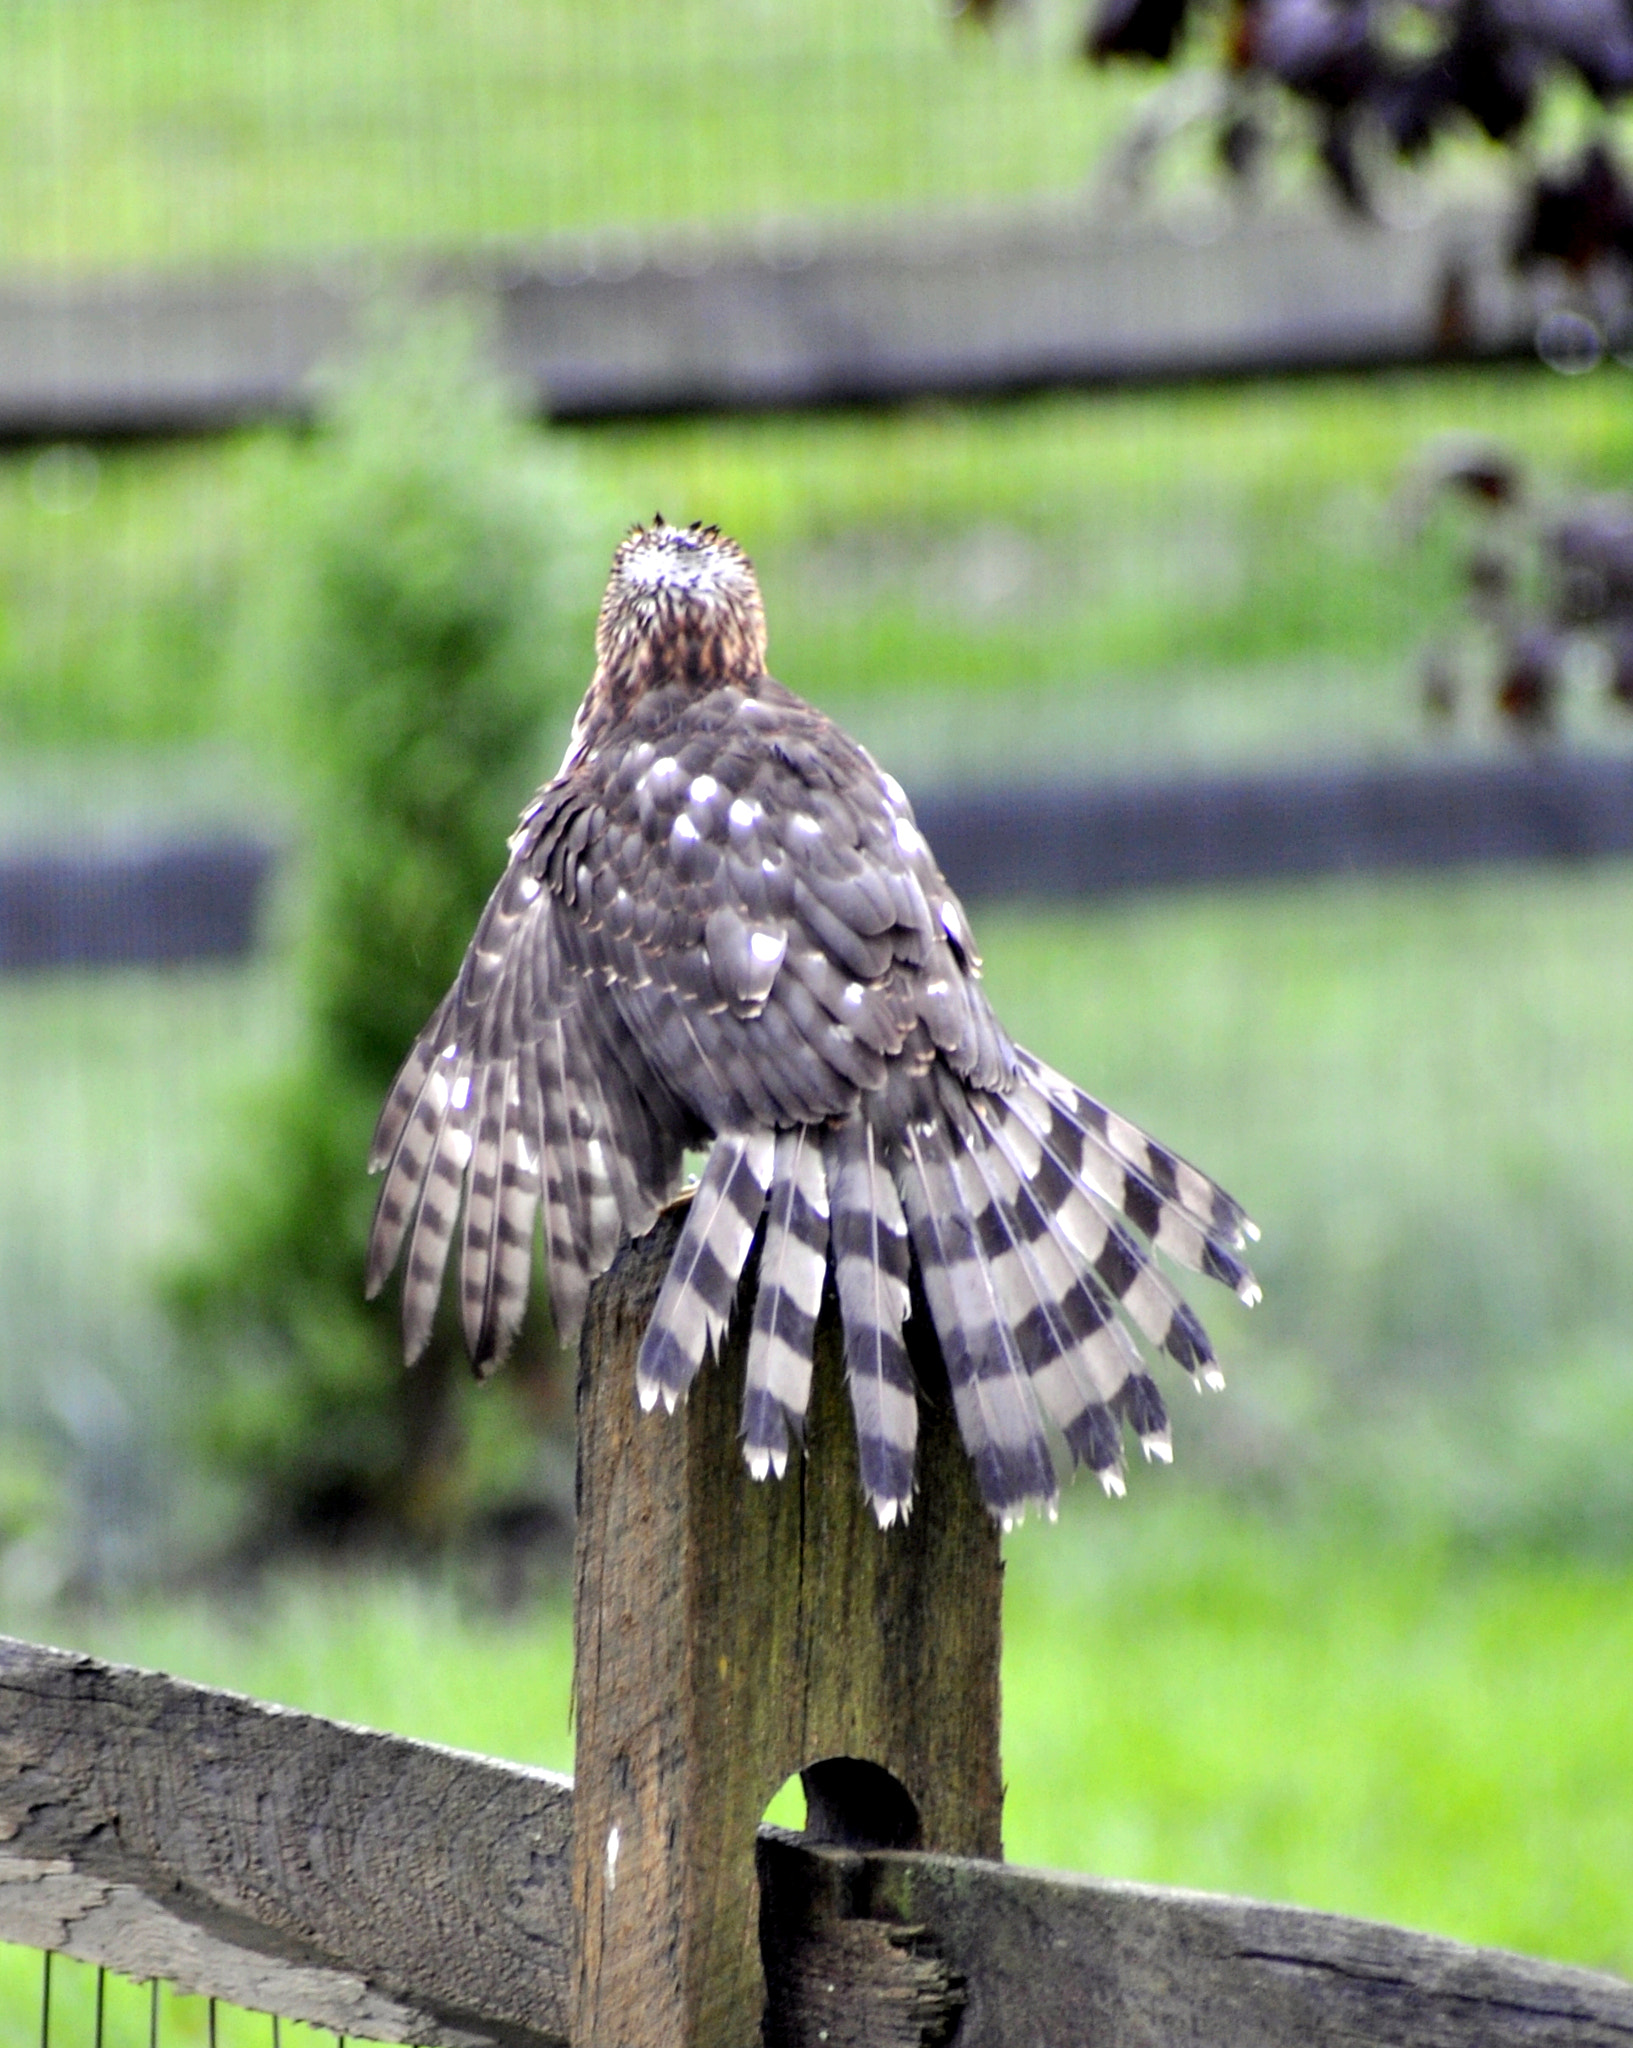 Nikon D90 sample photo. Brown tailed hawk early rainy fall day sw oh - had to shoot this through the window photography